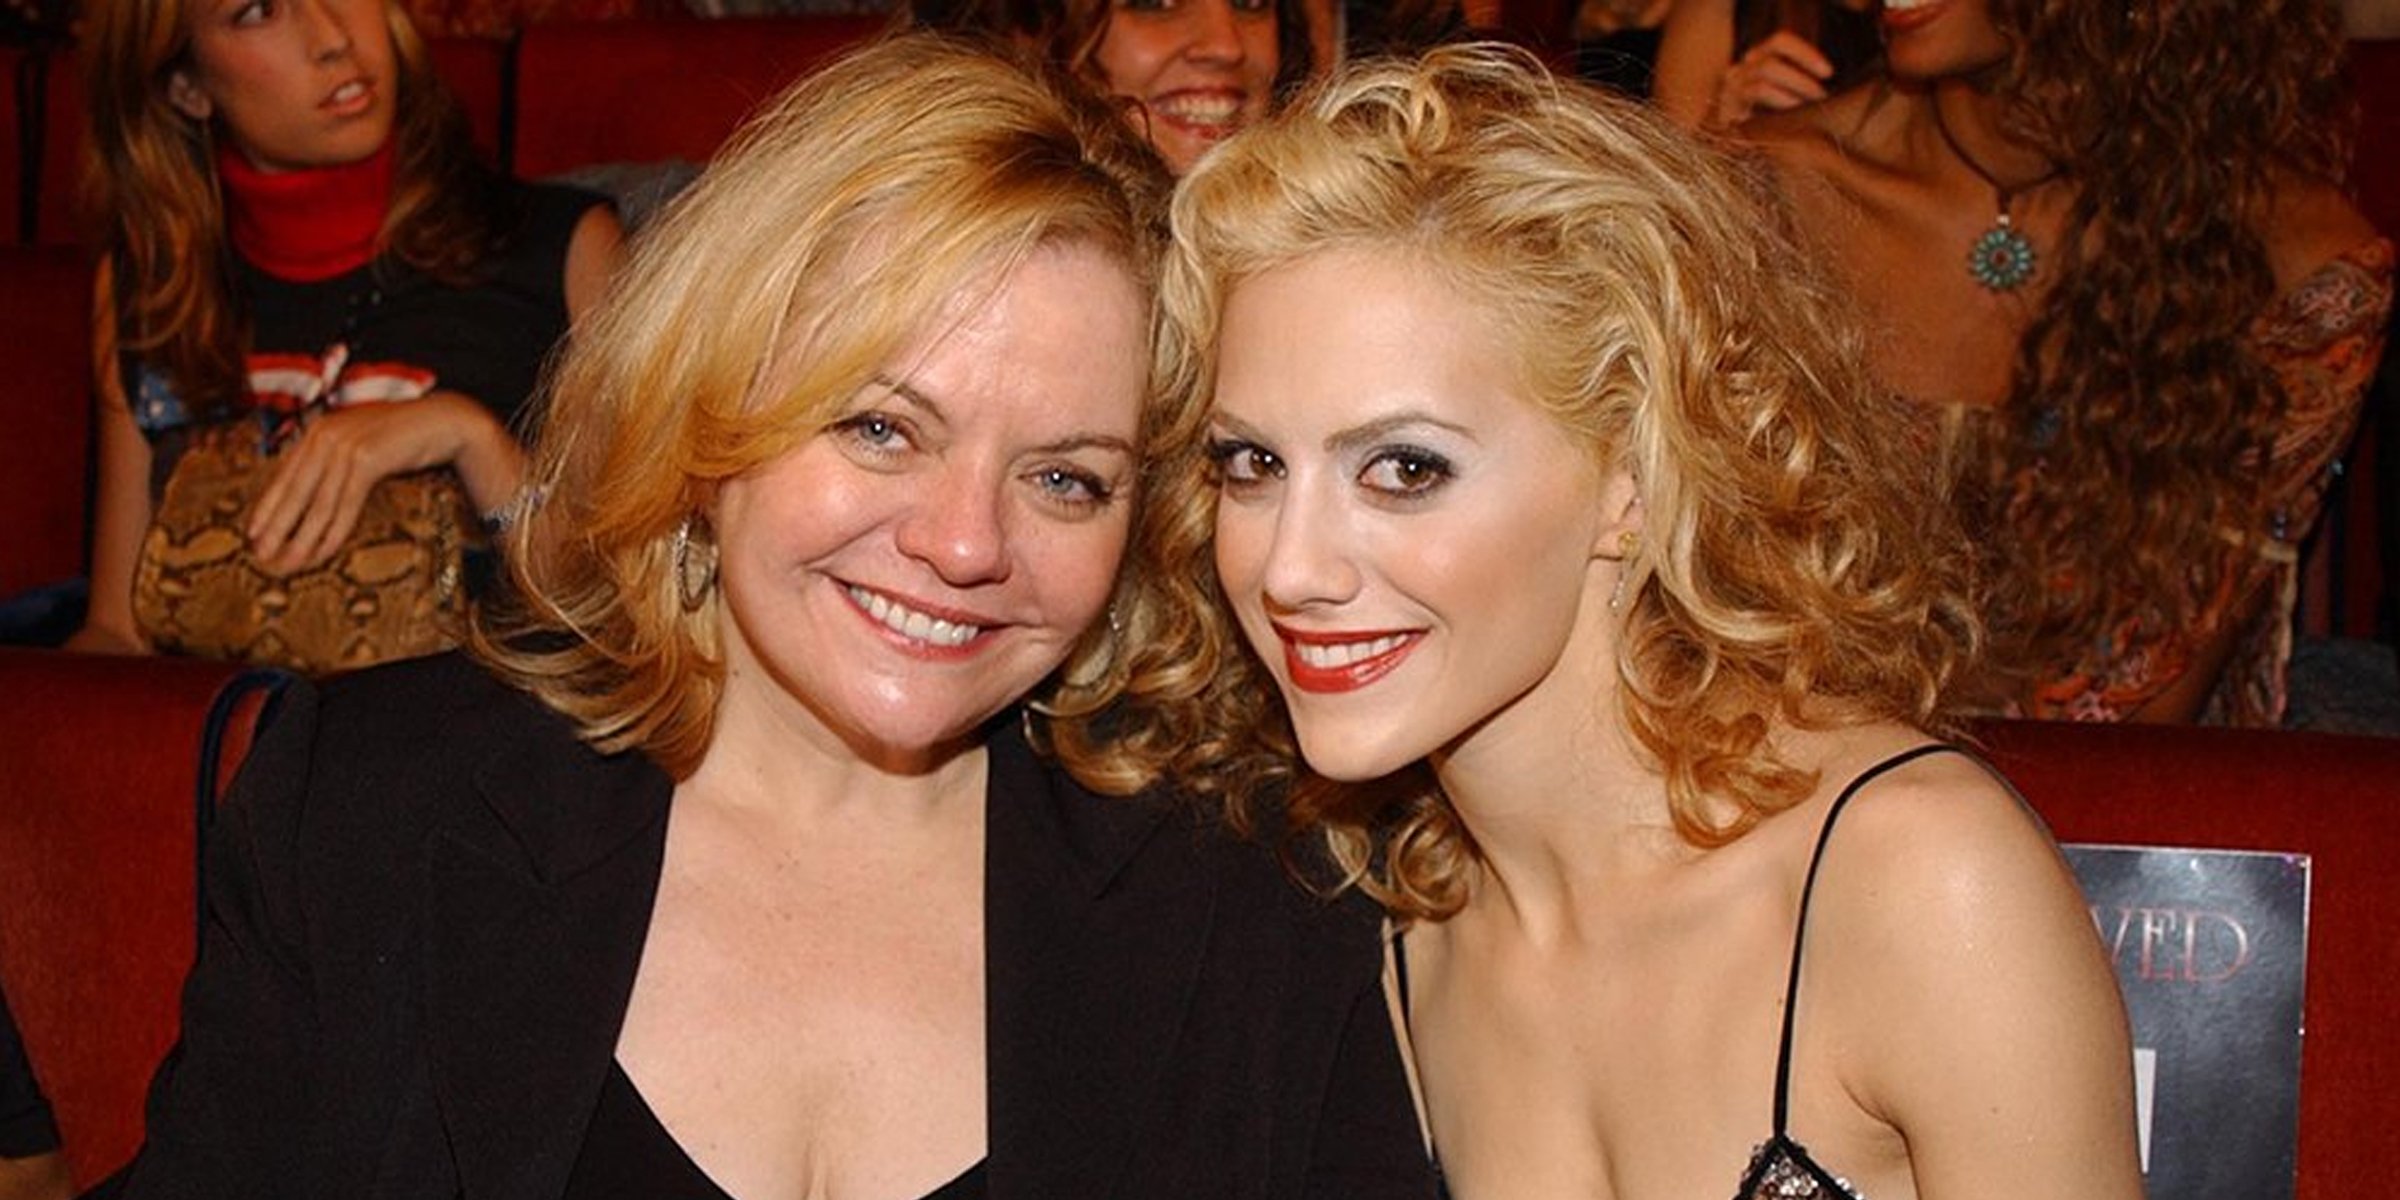 Sharon Murphy and Brittany Murphy. | Source: Getty Images